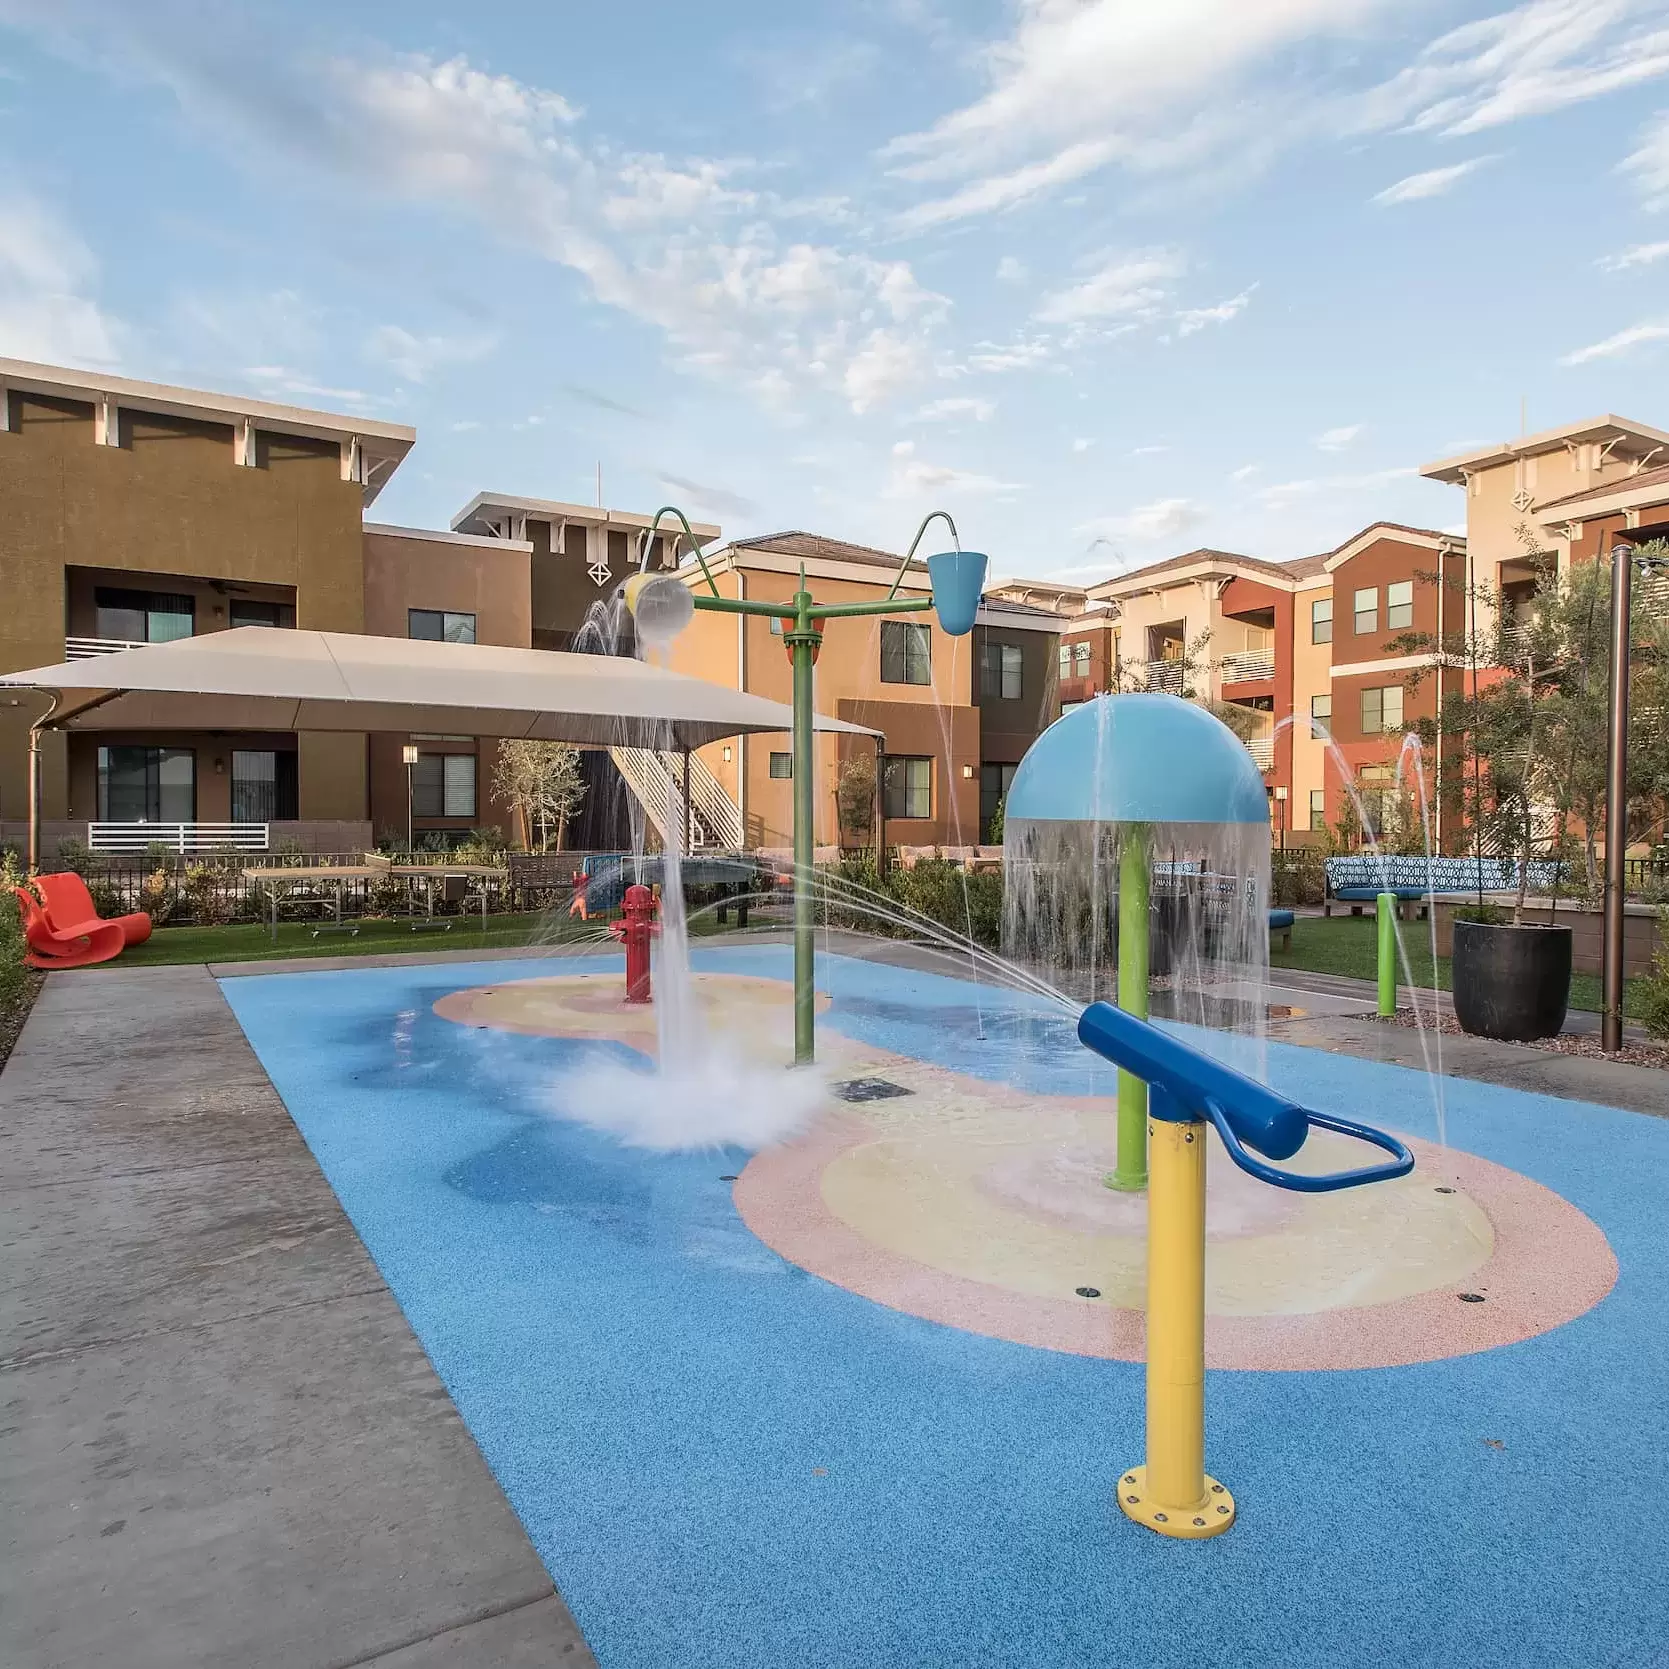 A splash pad for the children to enjoy the water and sun at Liv Northgate.